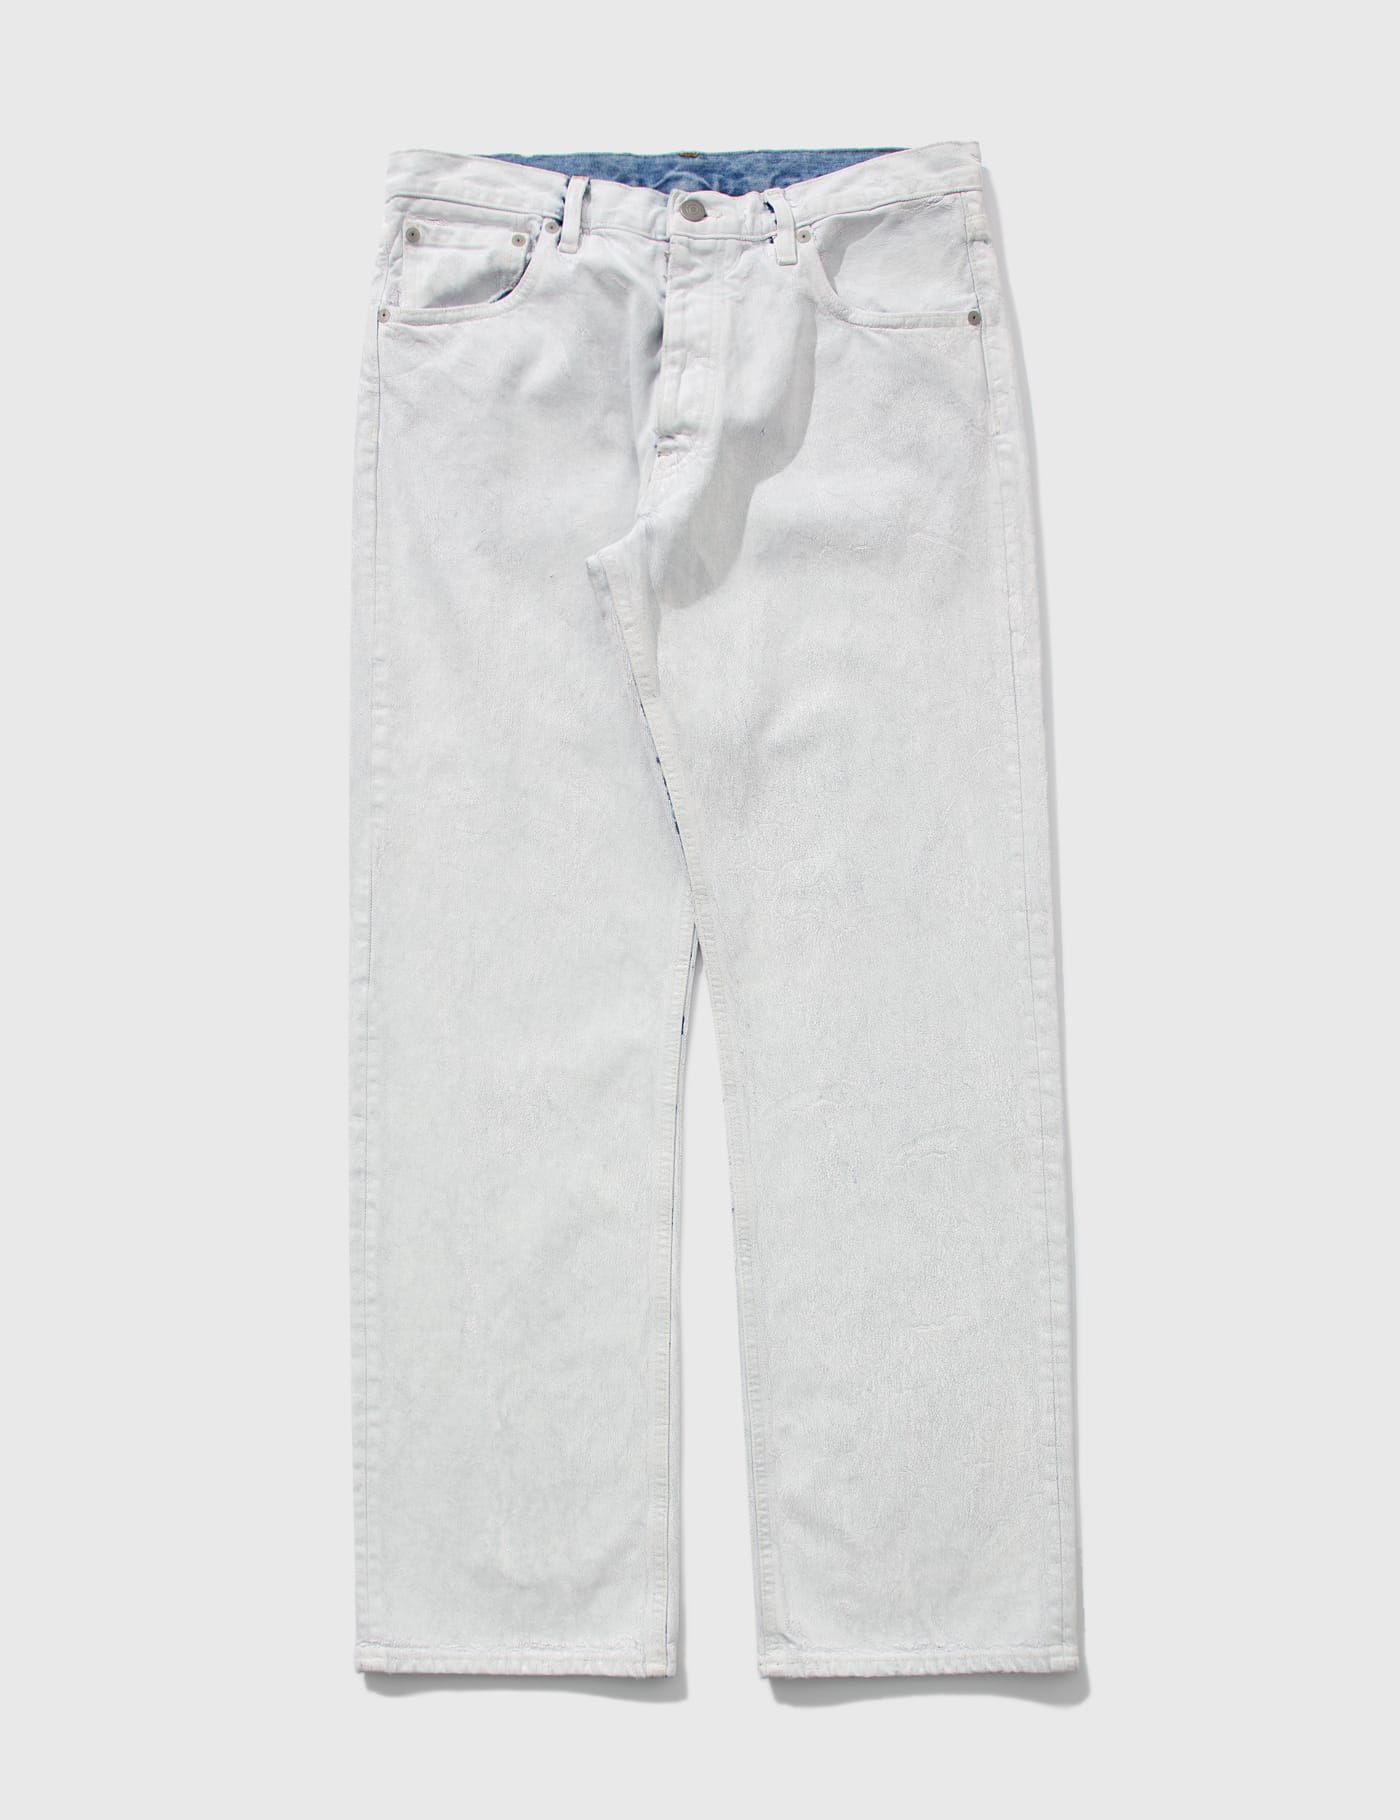 Maison Margiela - Painted Denim Jeans | HBX - Globally Curated 